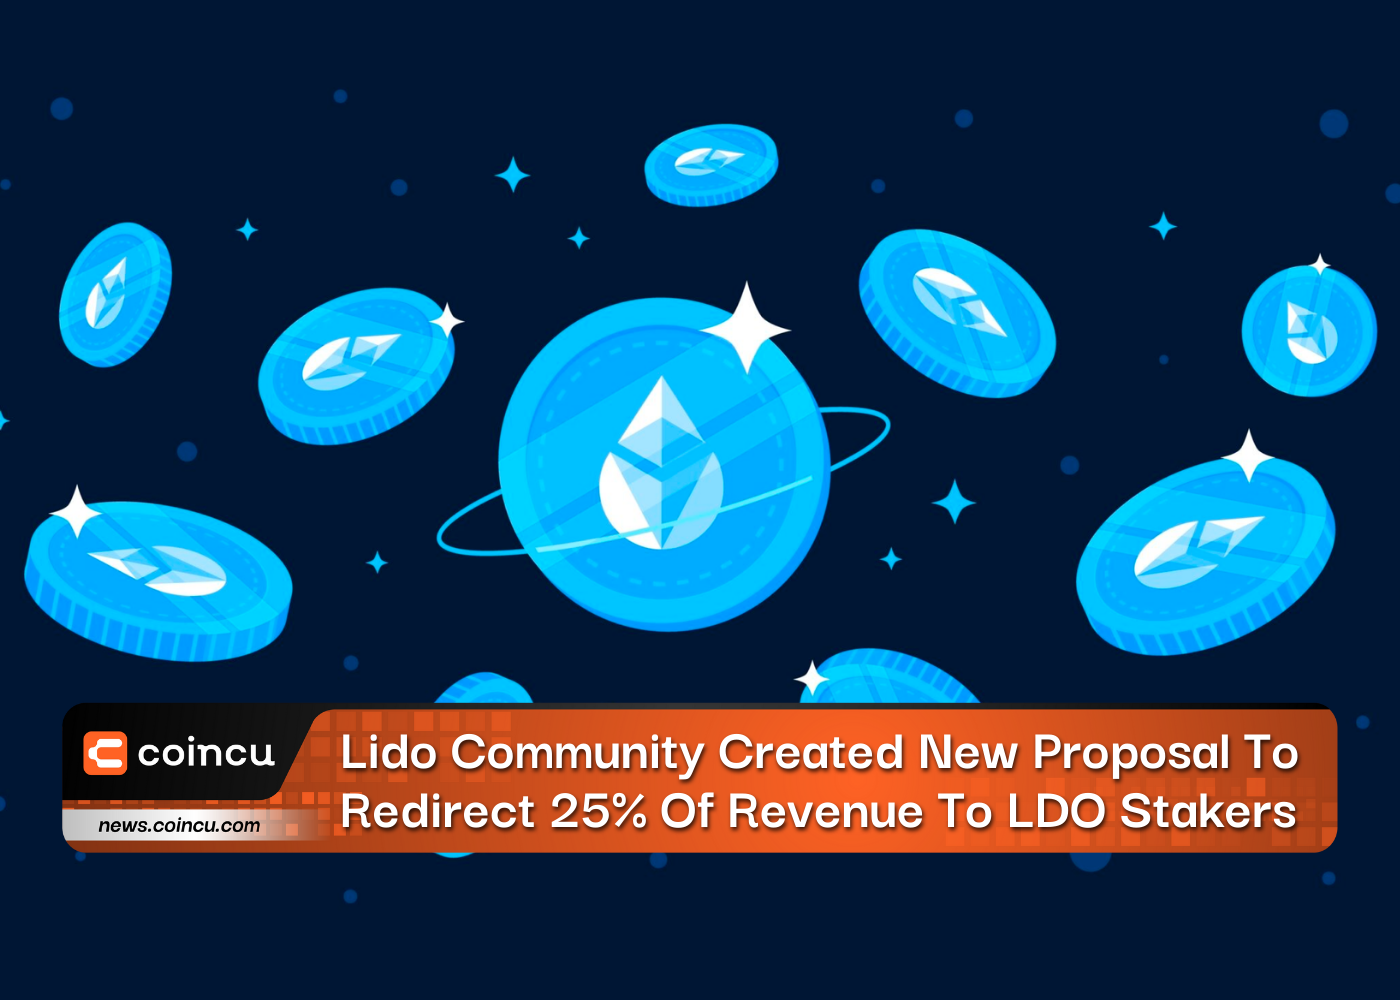 Lido Community Created New Proposal To Redirect 25% Of Revenue To LDO Stakers